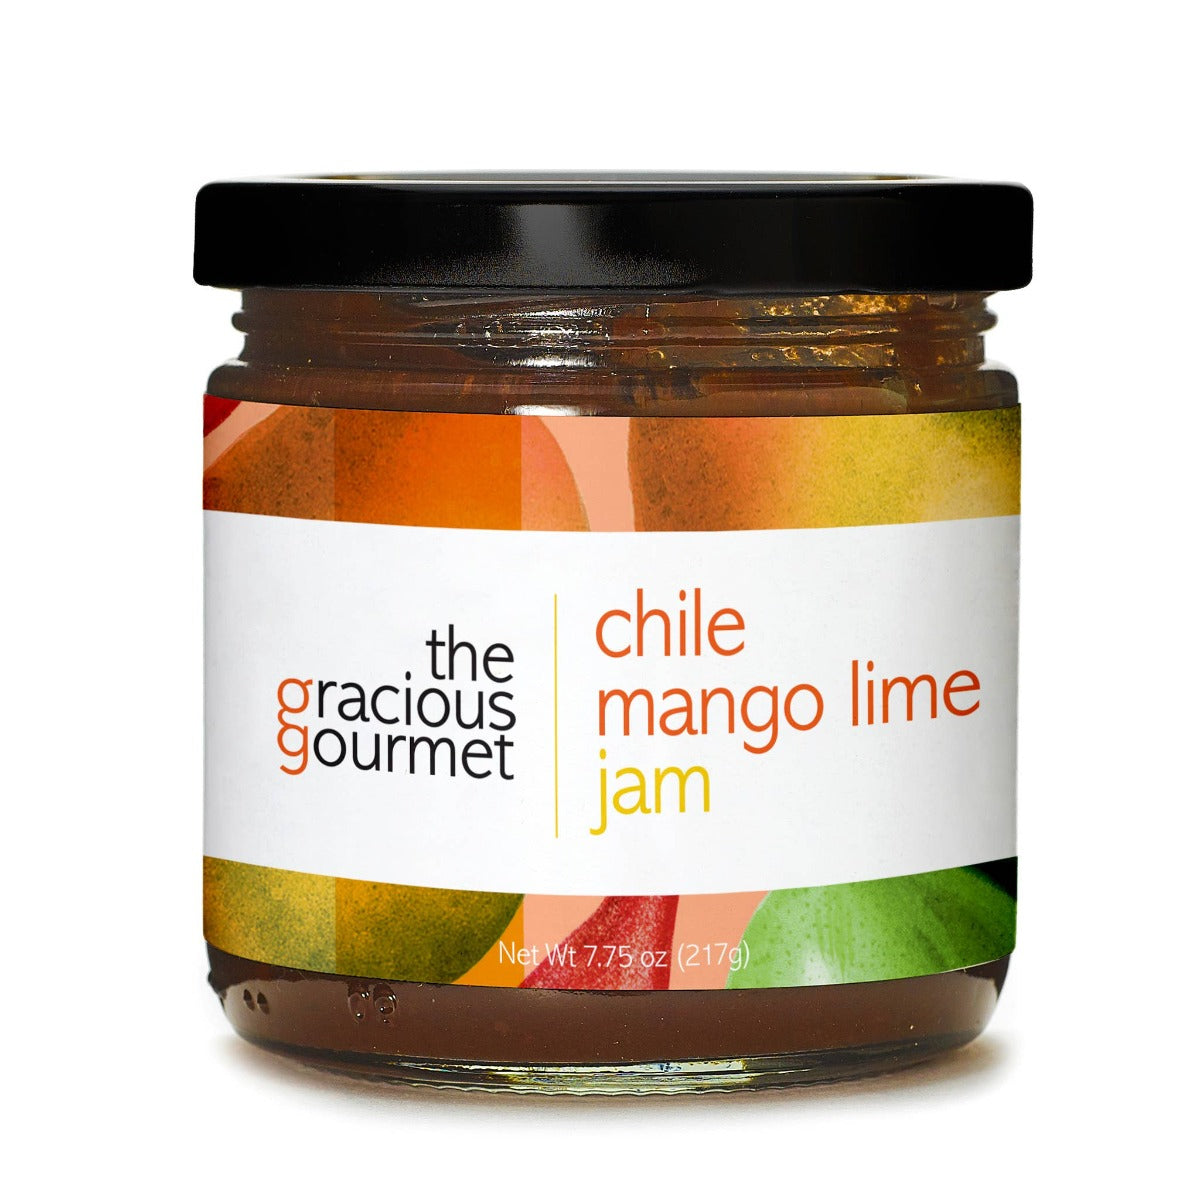 chili mango lime jam, perfect for cheeses, olive and basket